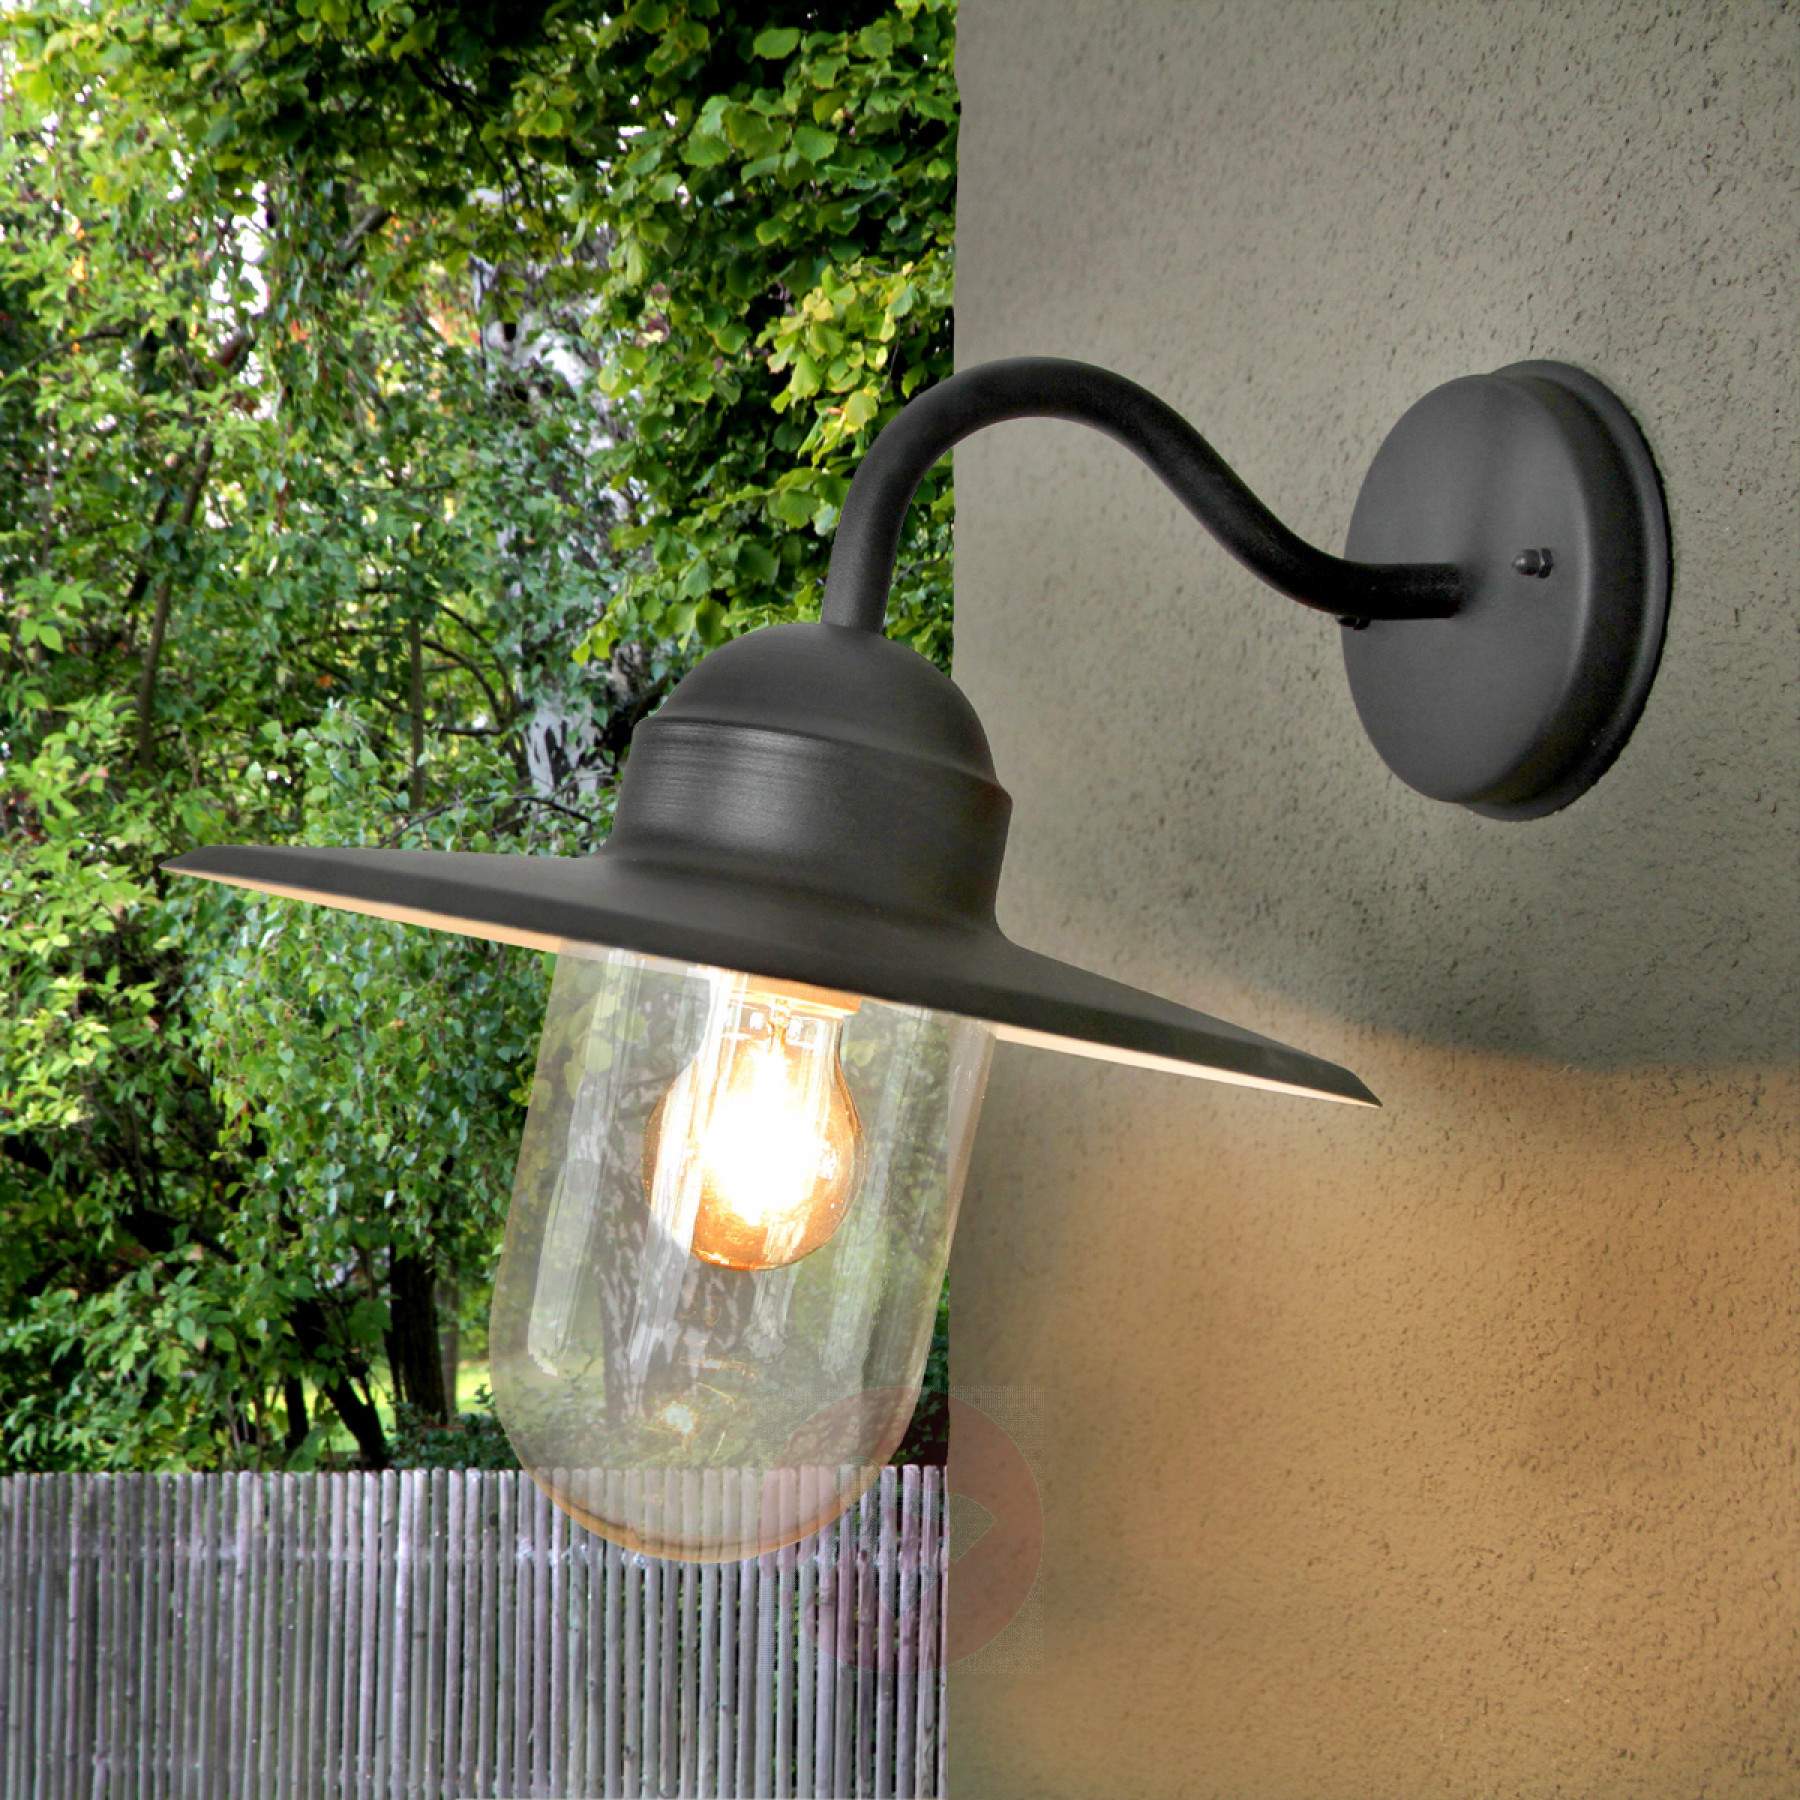 country house lighting ... black country house style outdoor wall light filip-9972025-09 ... TMIJSDO